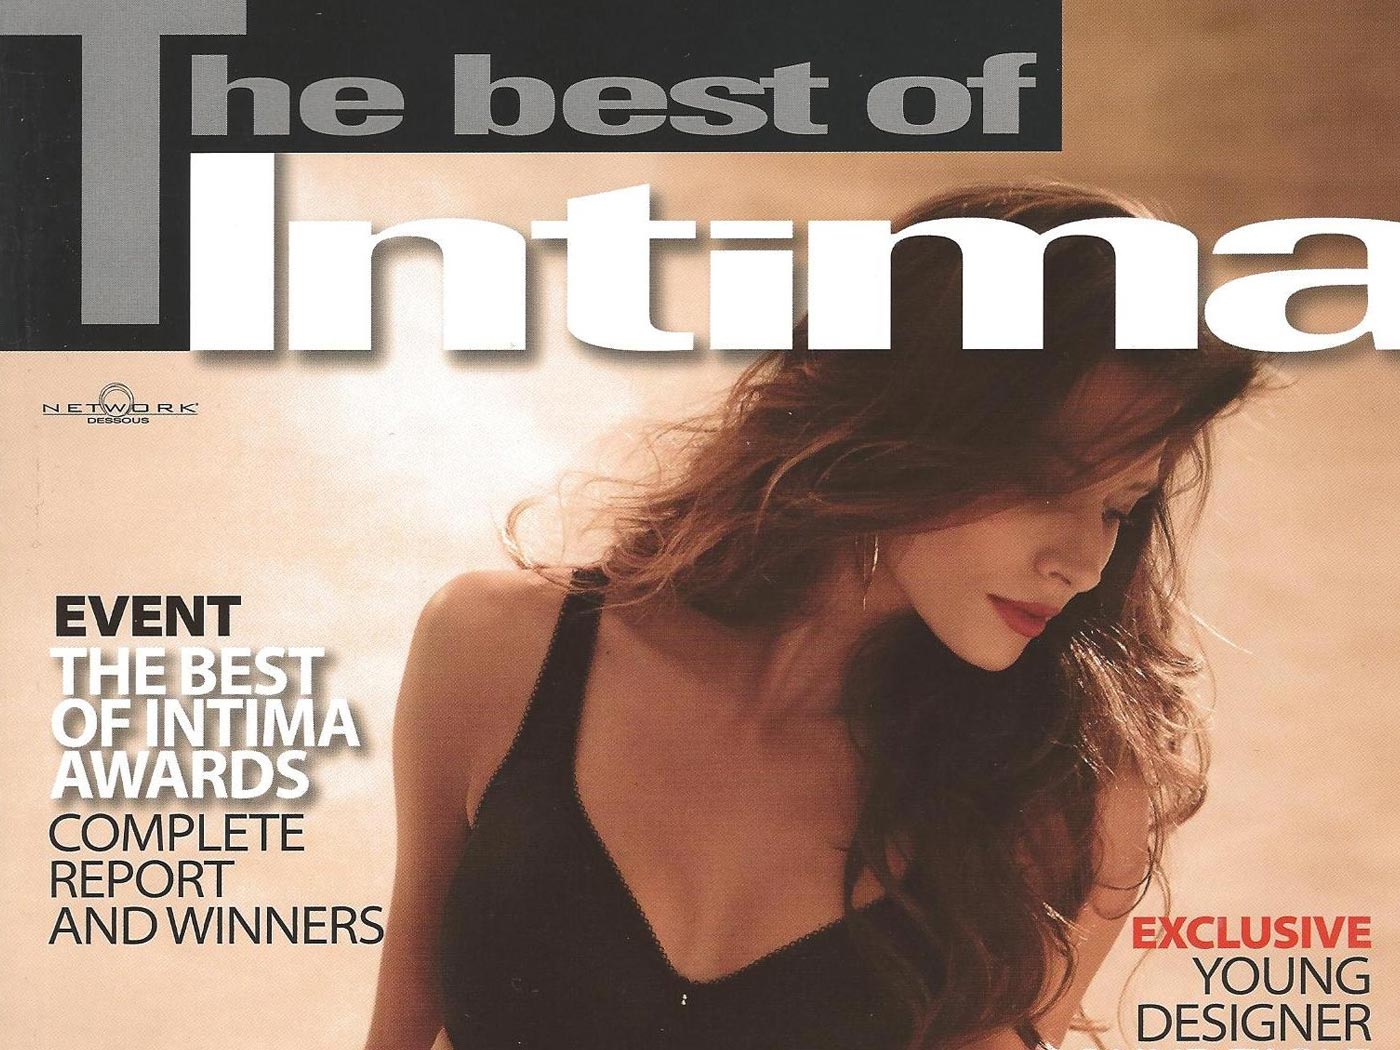 The Best of Linea Intima